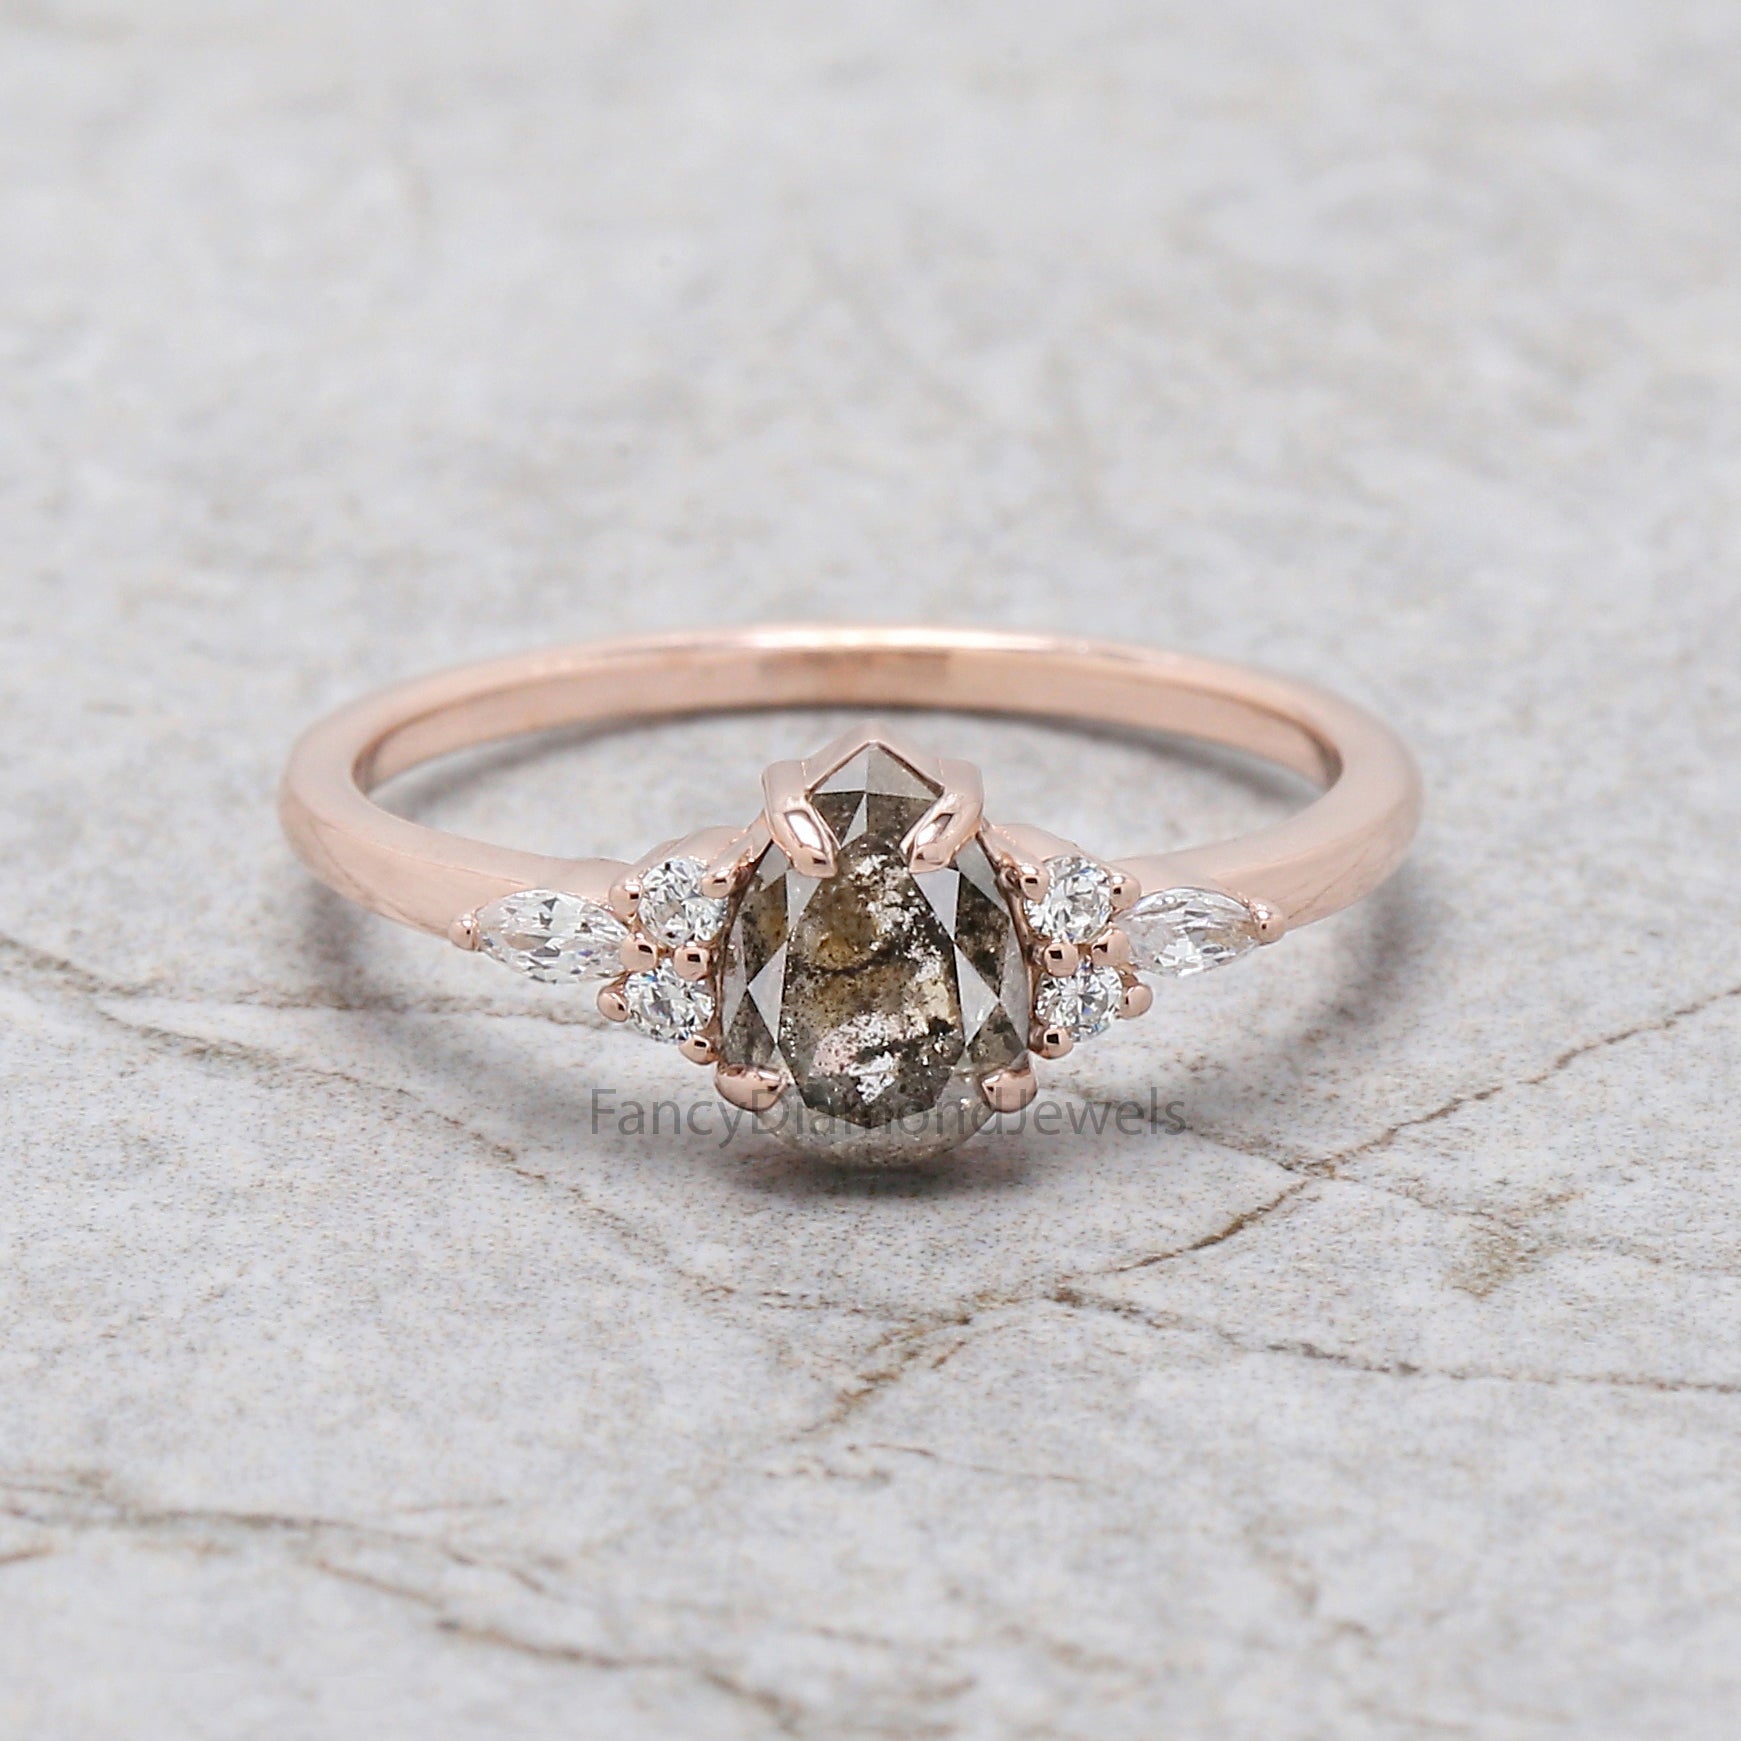 Pear Cut Salt And Pepper Diamond Ring 0.85 Ct 7.06 MM Pear Diamond Ring 14K Solid Rose Gold Silver Pear Engagement Ring Gift For Her QL2866